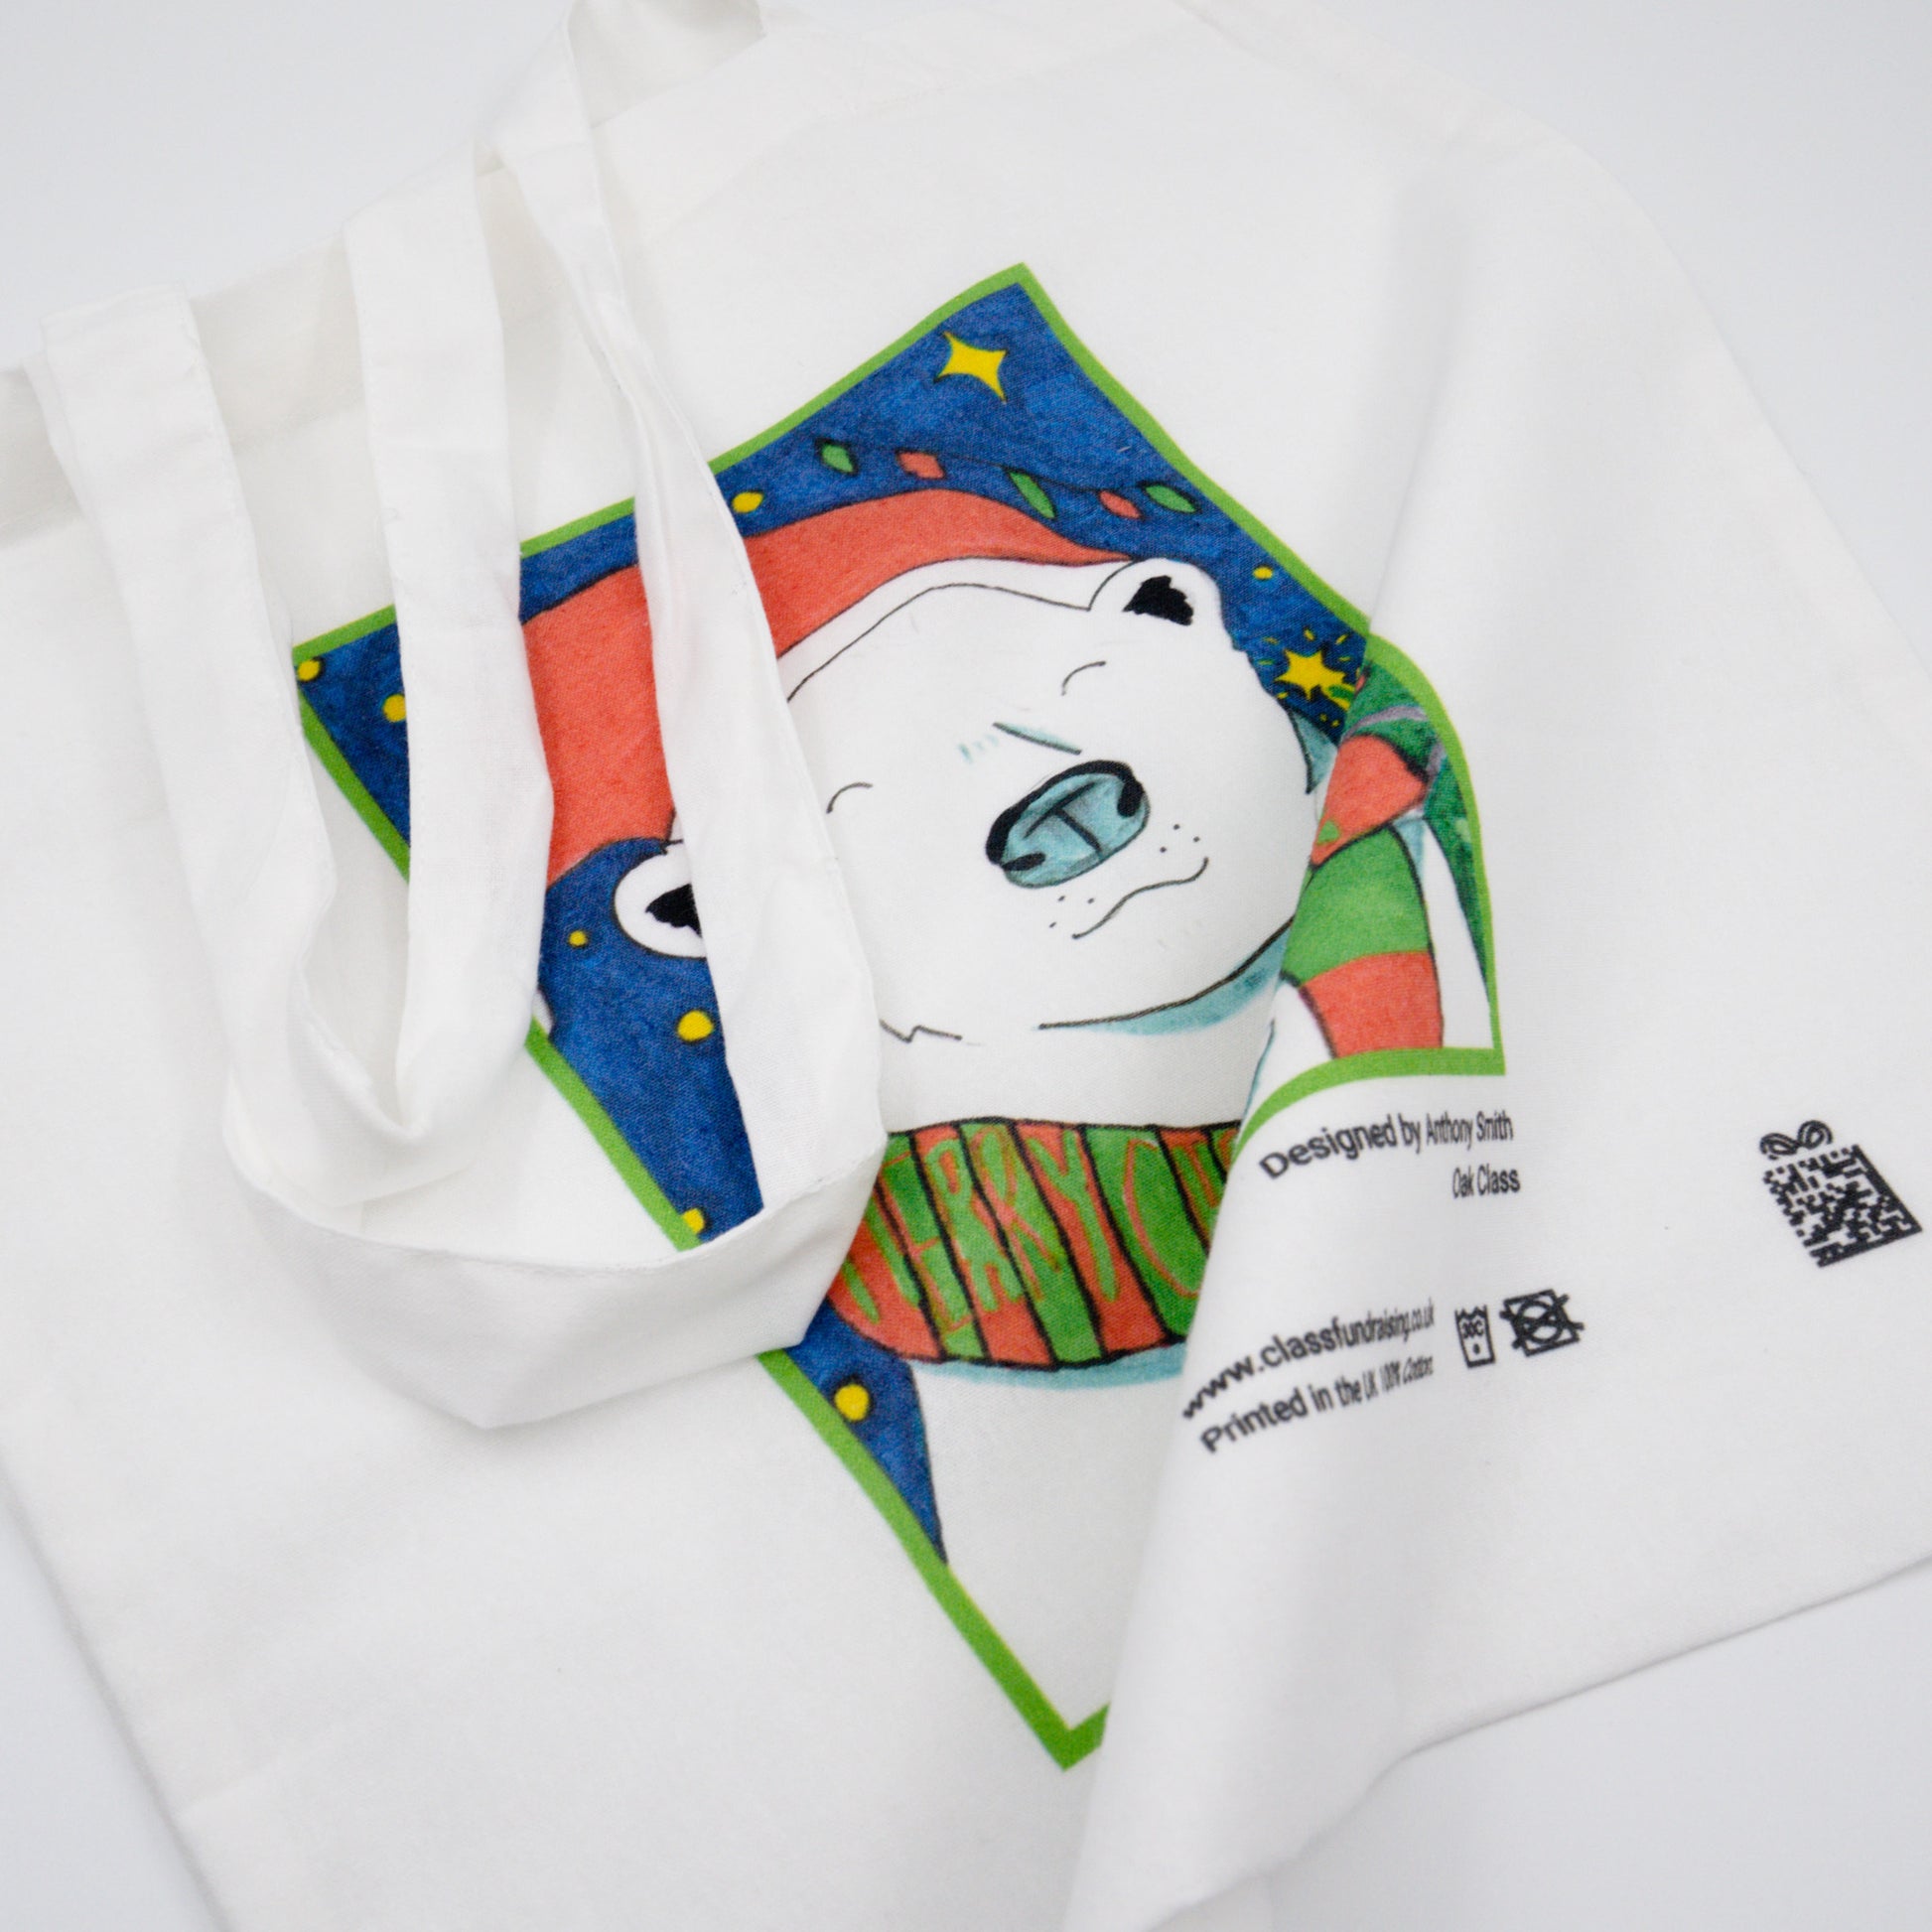 Personalised Cotton Bags for Schools - Great Fundraising IdeaTextile Design  & Print UK